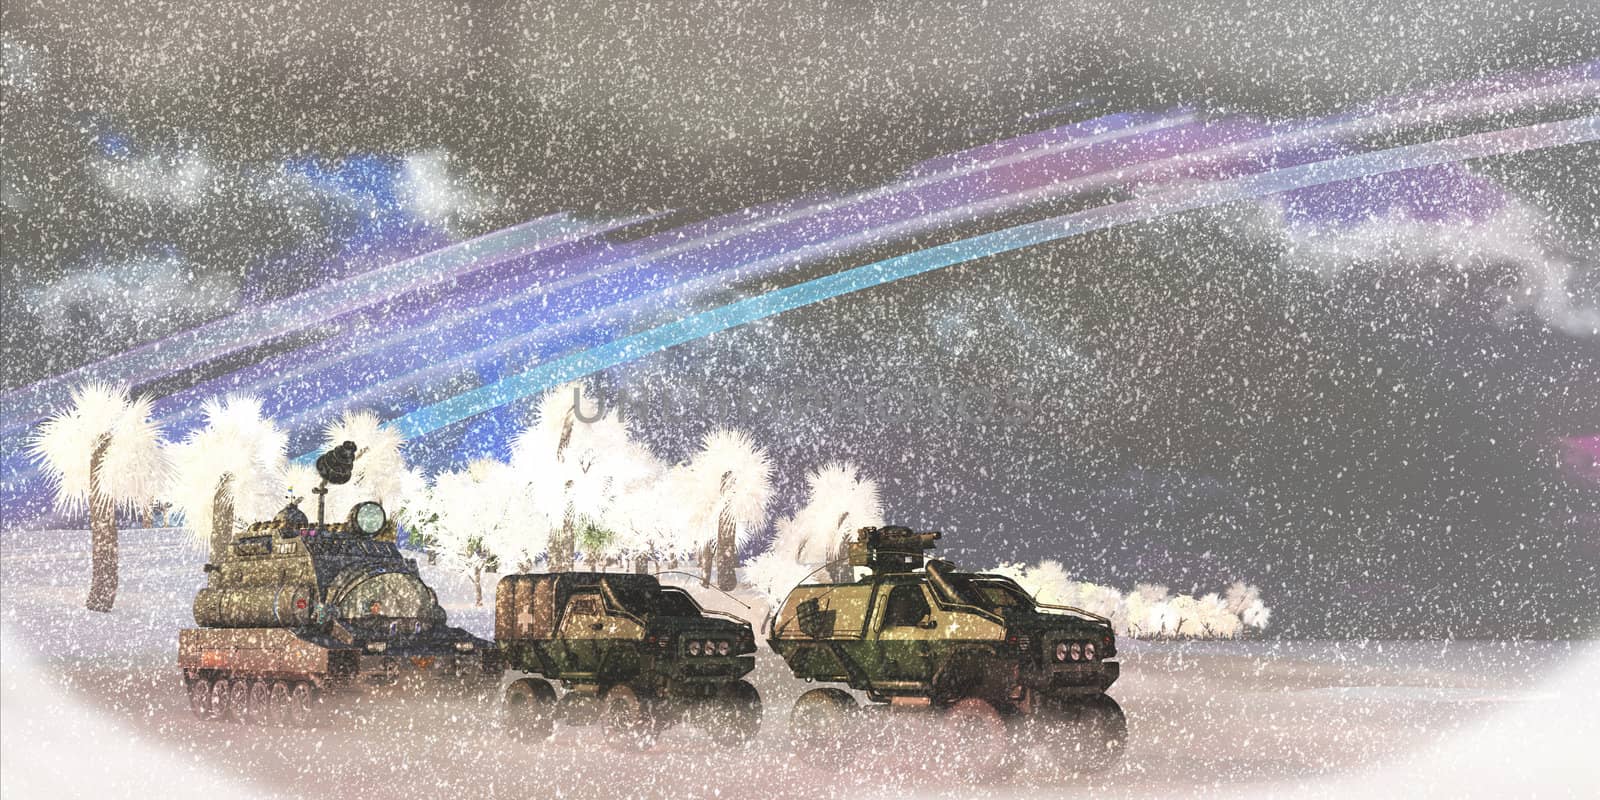 A military convoy crosses a frozen lake on an alien planet in a severe winter storm.